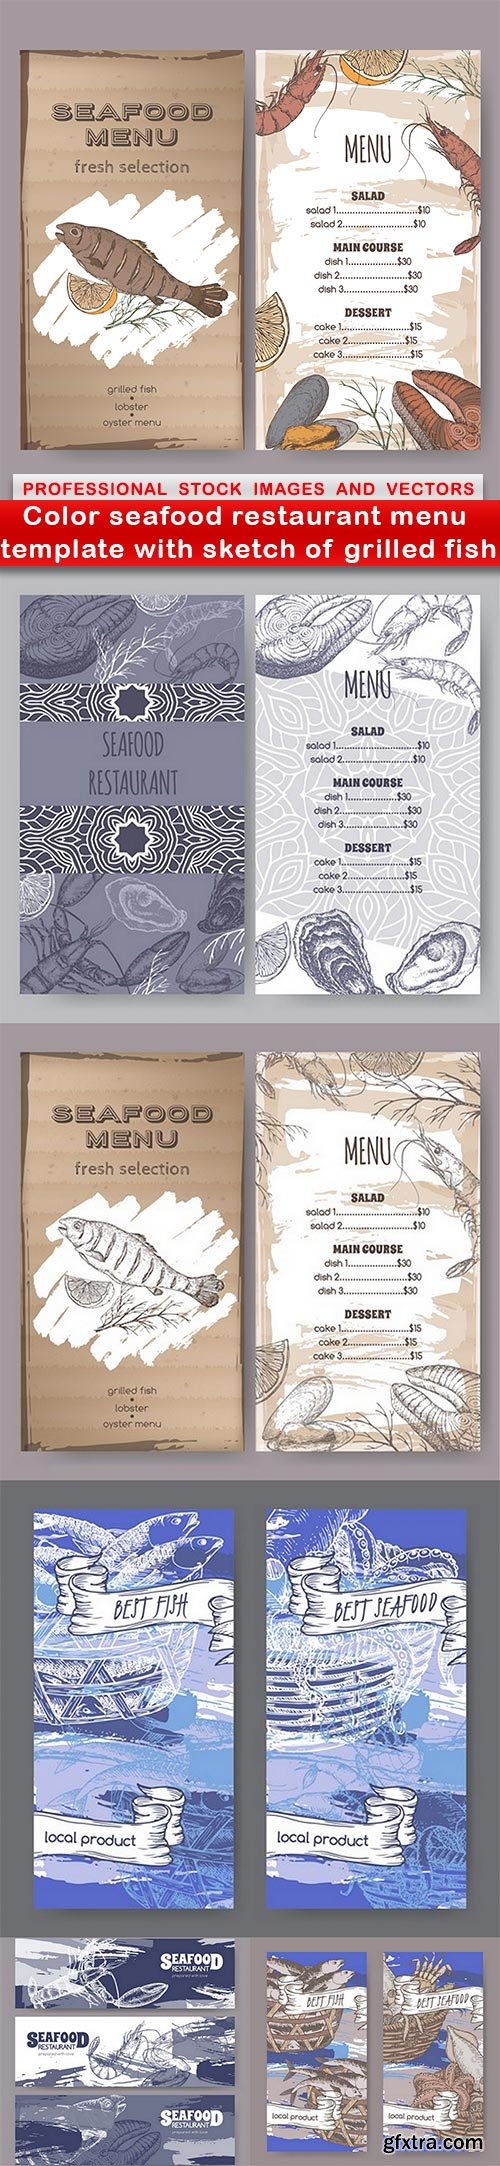 Color seafood restaurant menu template with sketch of grilled fish - 6 EPS